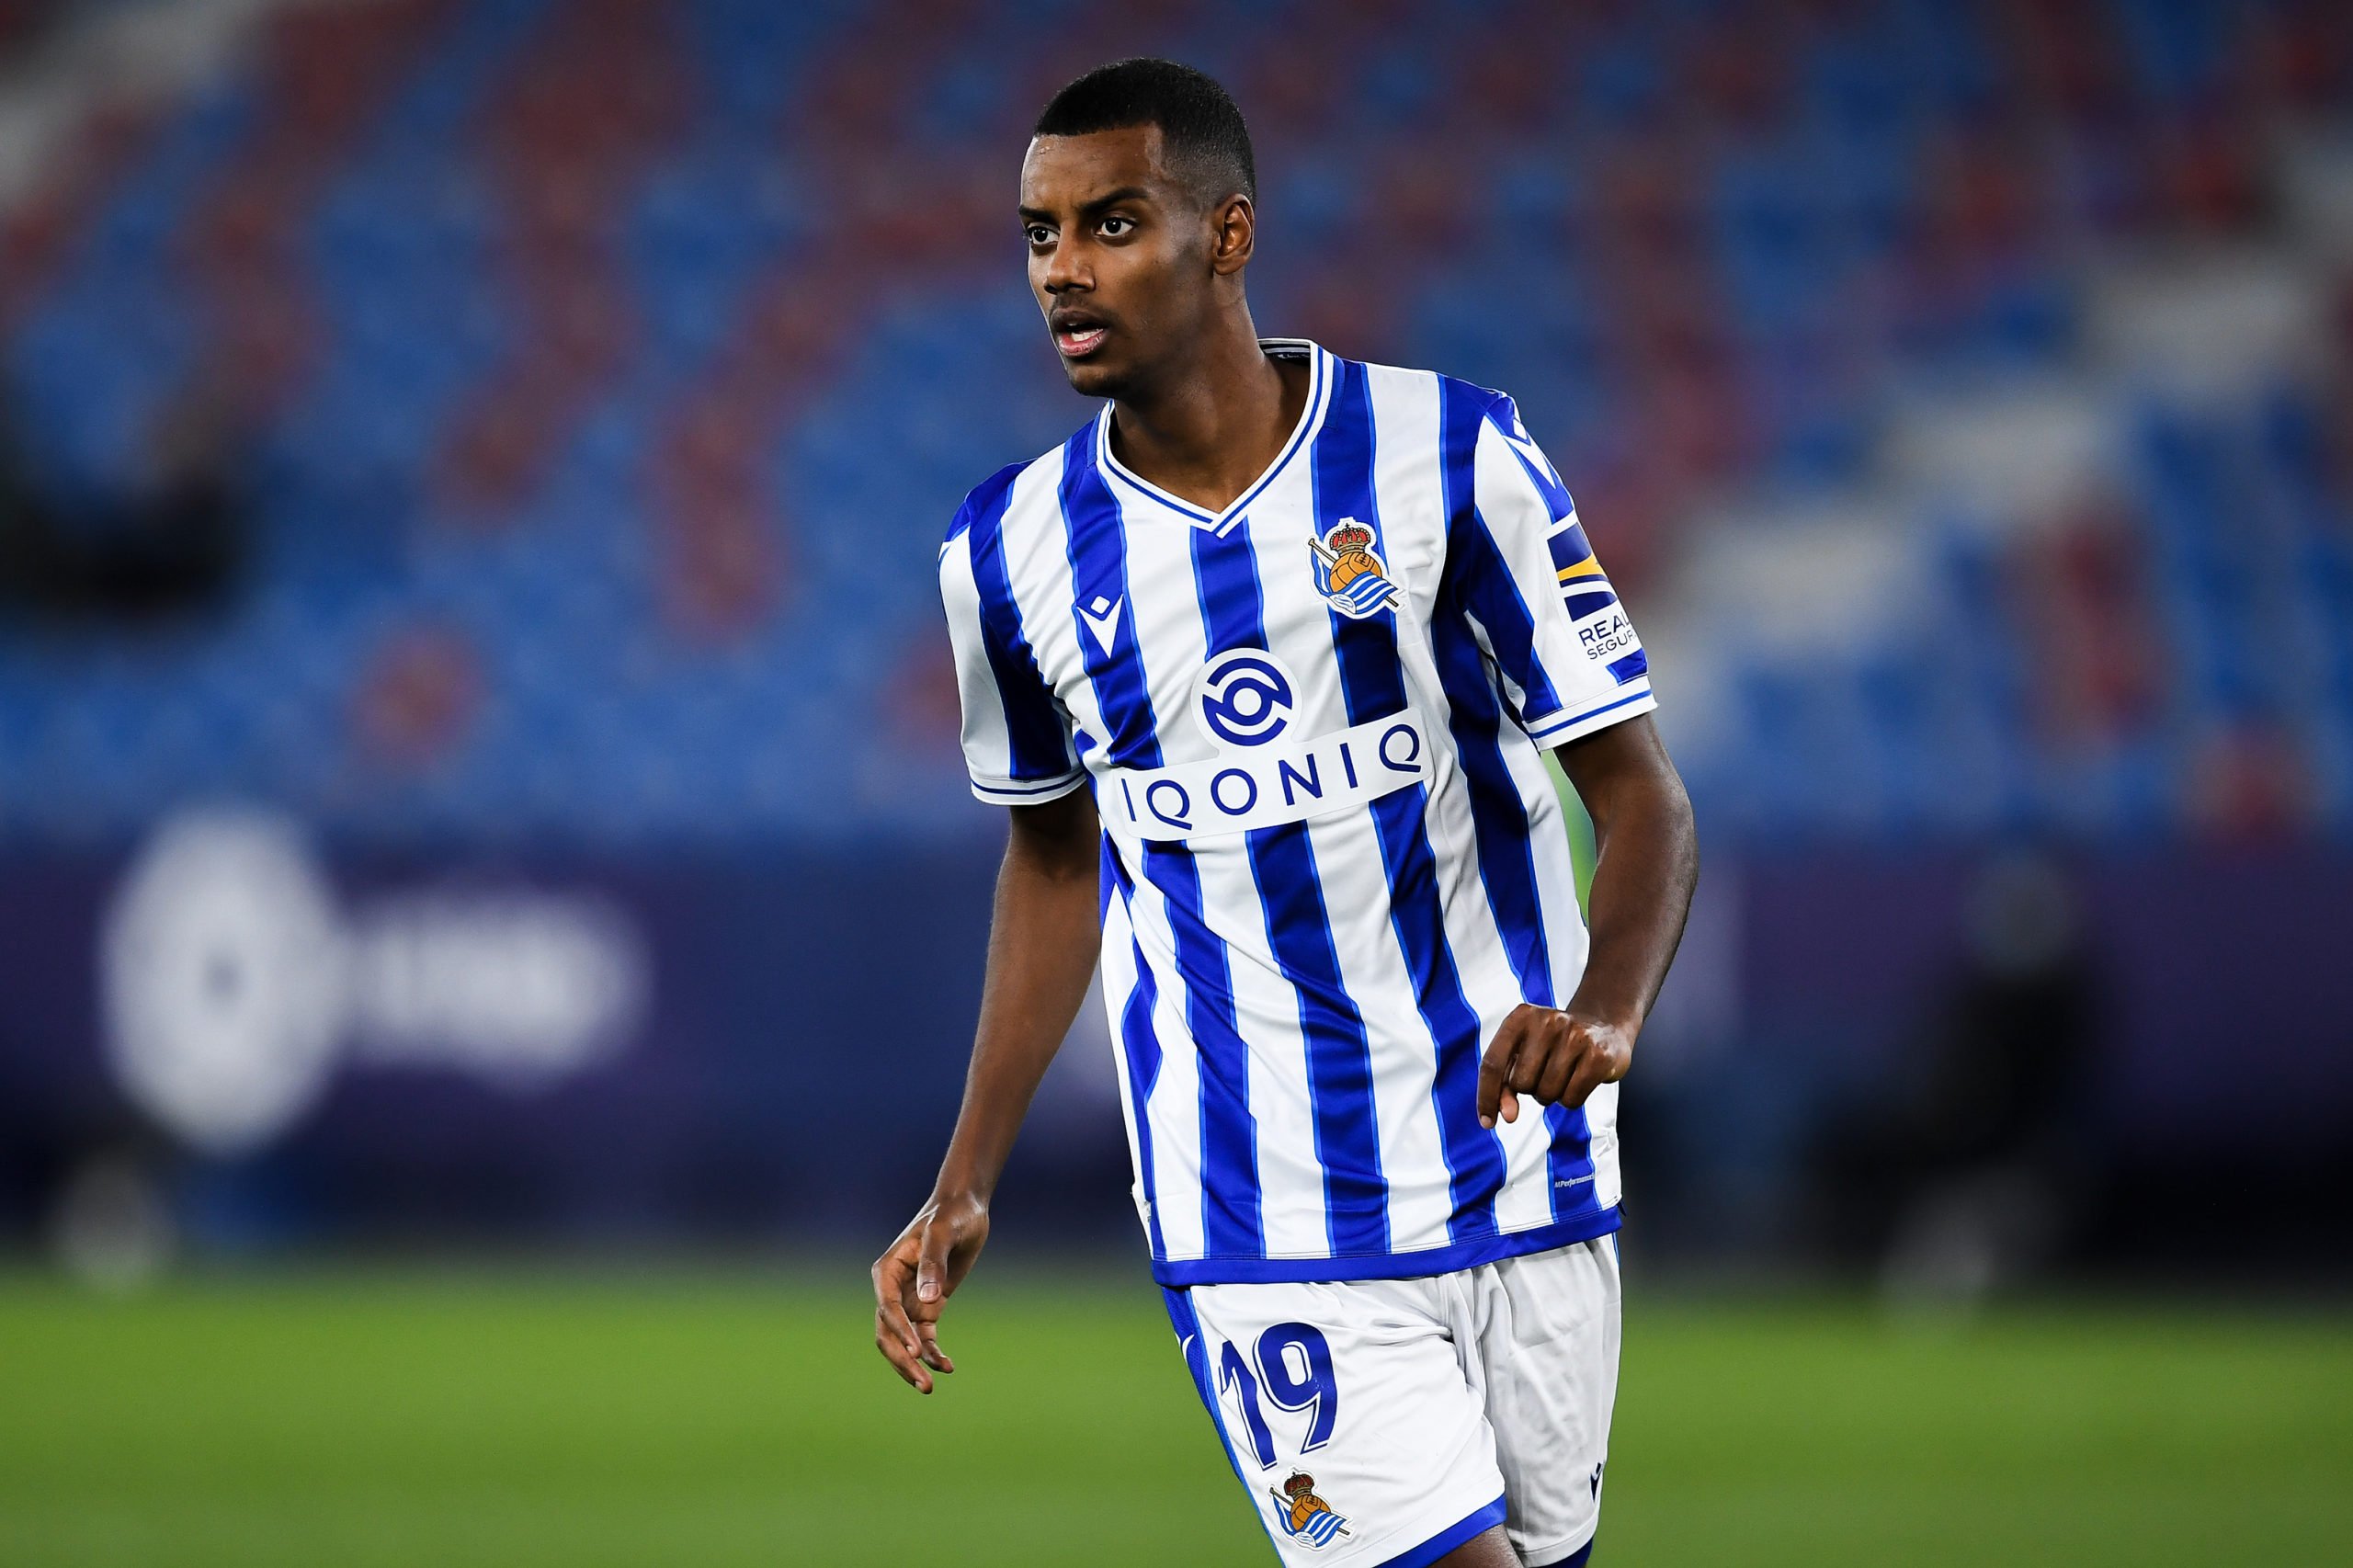 VALENCIA, SPAIN - DECEMBER 19: Alexander Isak of Real Sociedad looks on during the La Liga Santander match between Levante UD and Real Sociedad at Ciutat de Valencia Stadium on December 19, 2020 in Valencia, Spain. (Photo by David Ramos/Getty Images)The 4th Official uses images provided by the following image agency: Getty Images (https://www.gettyimages.de/) Imago Images (https://www.imago-images.de/)